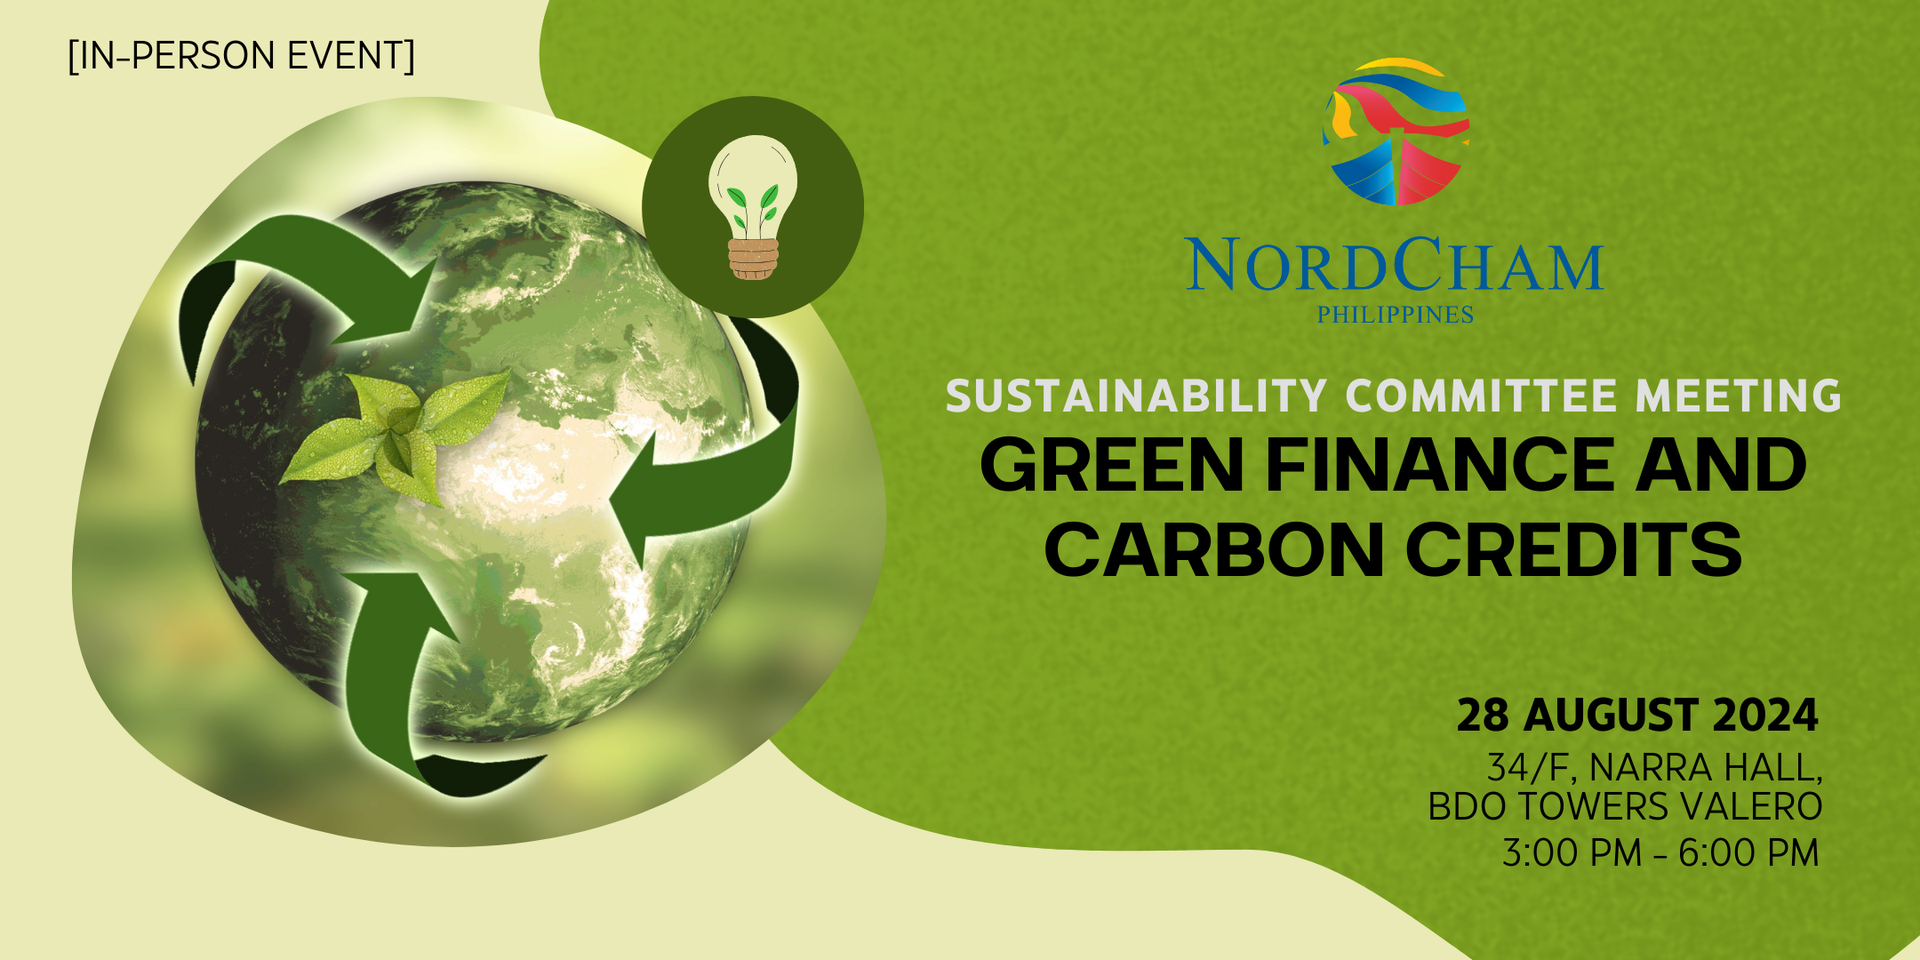 thumbnails SUSTAINABILITY COMMITTEE MEETING: GREEN FINANCE & CARBON CREDITS | 28 AUGUST 2024 | NARRA HALL, BDO TOWERS VALERO